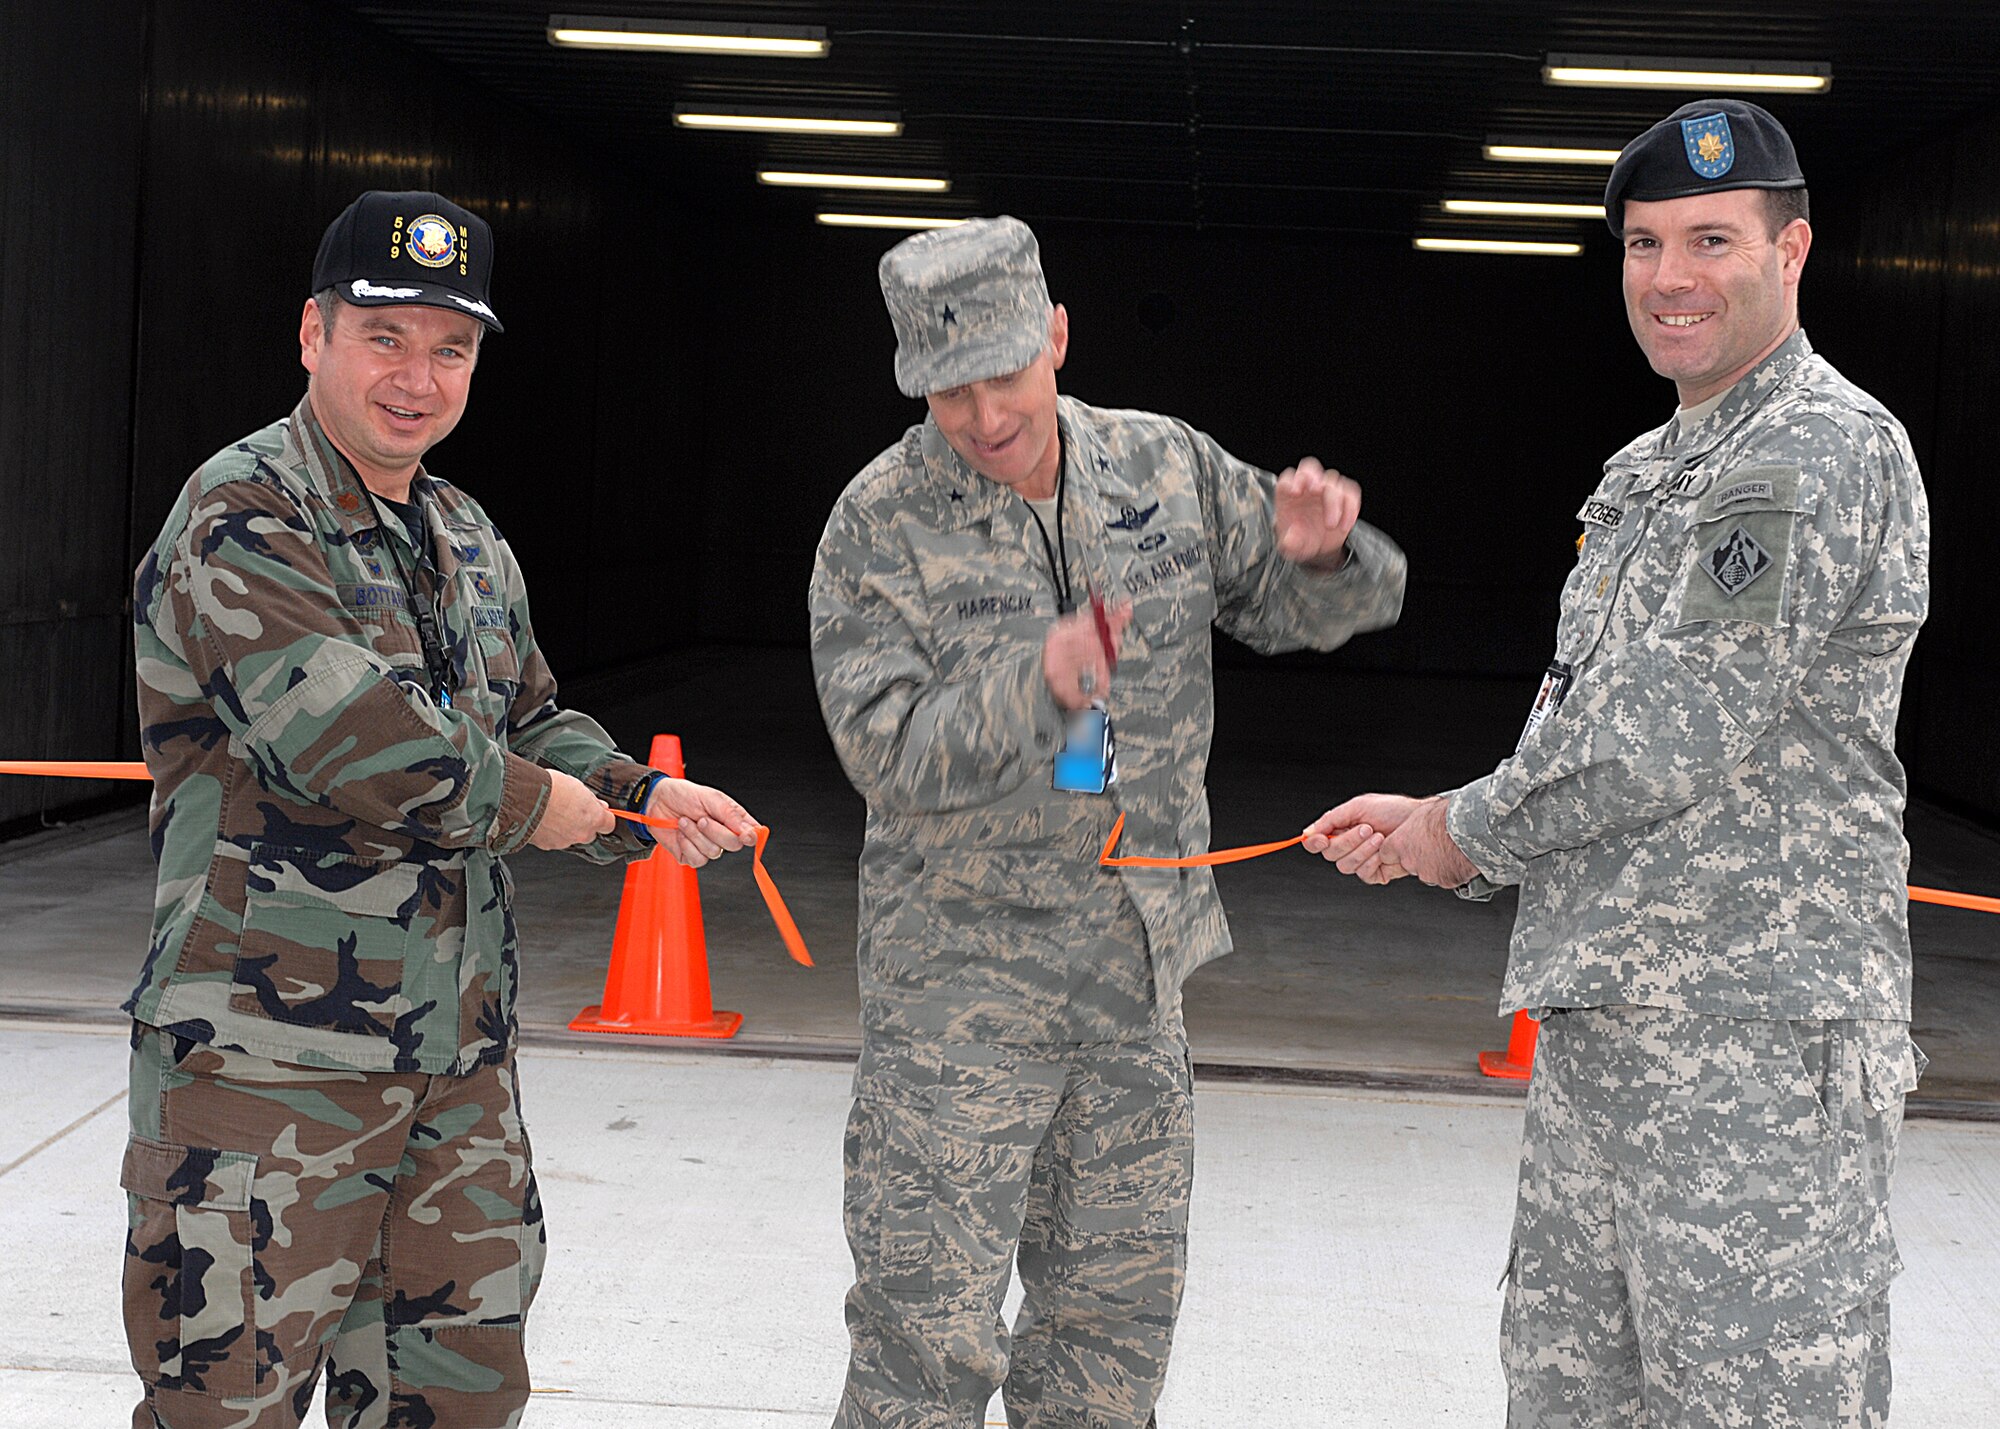 WHITEMAN AIR FORCE BASE, Mo. – Maj. Kenneth Bottari, 509th Munitions Squadron commander, Brig. Gen. Garrett Harencak, 509th Bomb Wing commander and Major Michael Fitzgerald, U.S. Army Corps of Engineers, cuts the ribbon for the grand opening of the new Igloos in the Weapon Storage Area Jan. 7. The munitions igloo project broke ground in May 2006 as a joint effort between Army Corp of Engineers, 509th Security Forces Squadron, and 509th MUNS. The completion of the igloos created 10,000 square feet of floor space to house a variety of bombs and other munitions items.  (U.S. Air Force photo/Tech. Sgt. Samuel A. Park)